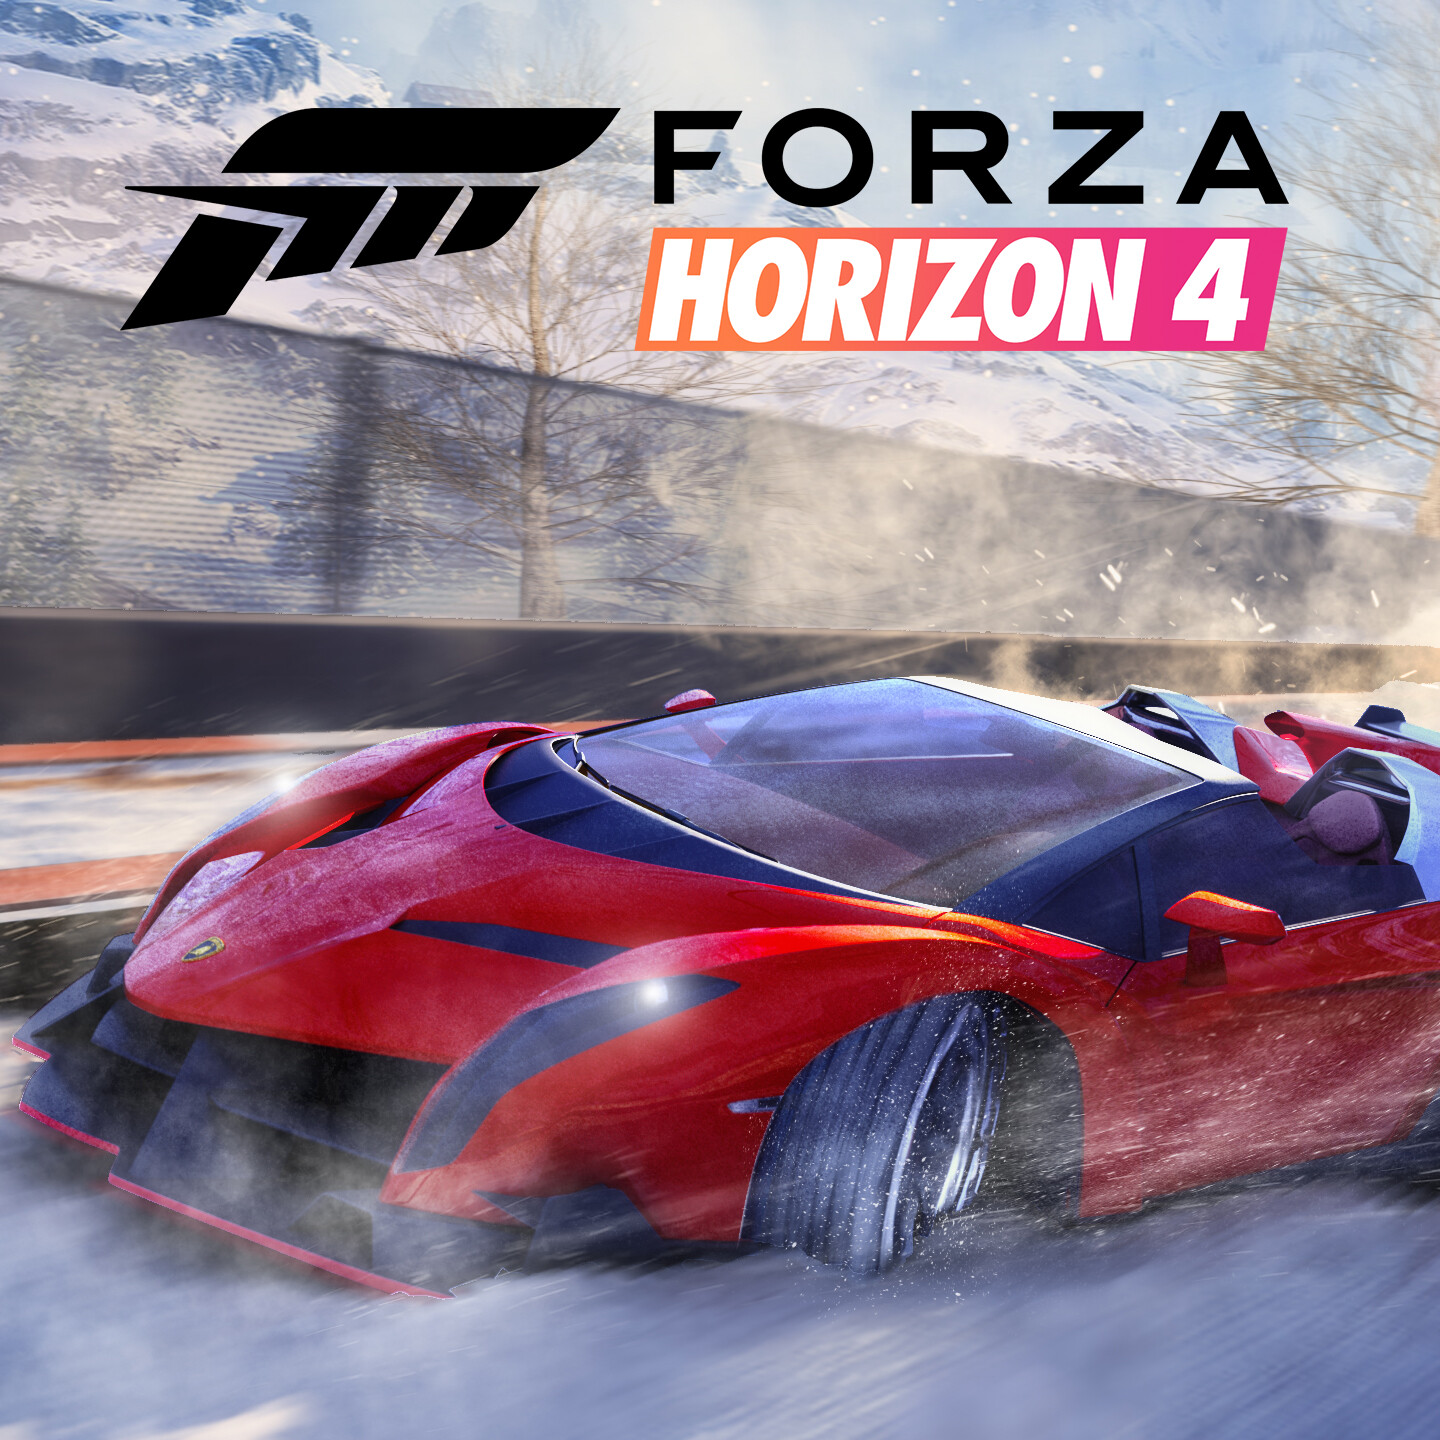 Forza Horizon 4 - PS4 cover by youknowwho77 on DeviantArt